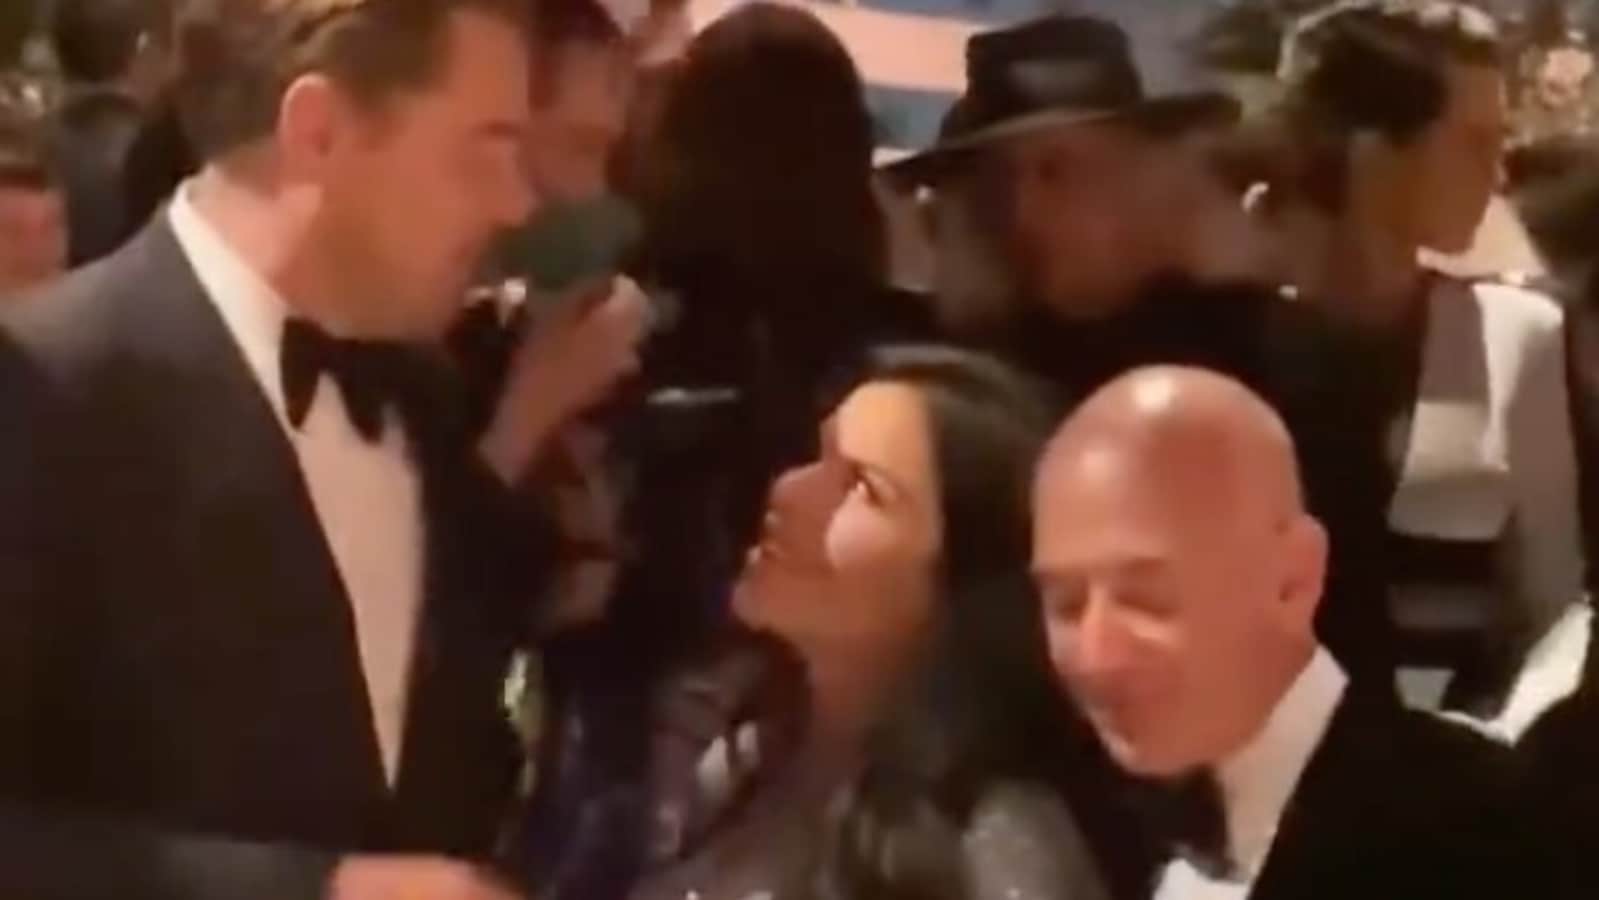 Internet Is Obsessed With This Video Of Jeff Bezos Girlfriend Eyeing 